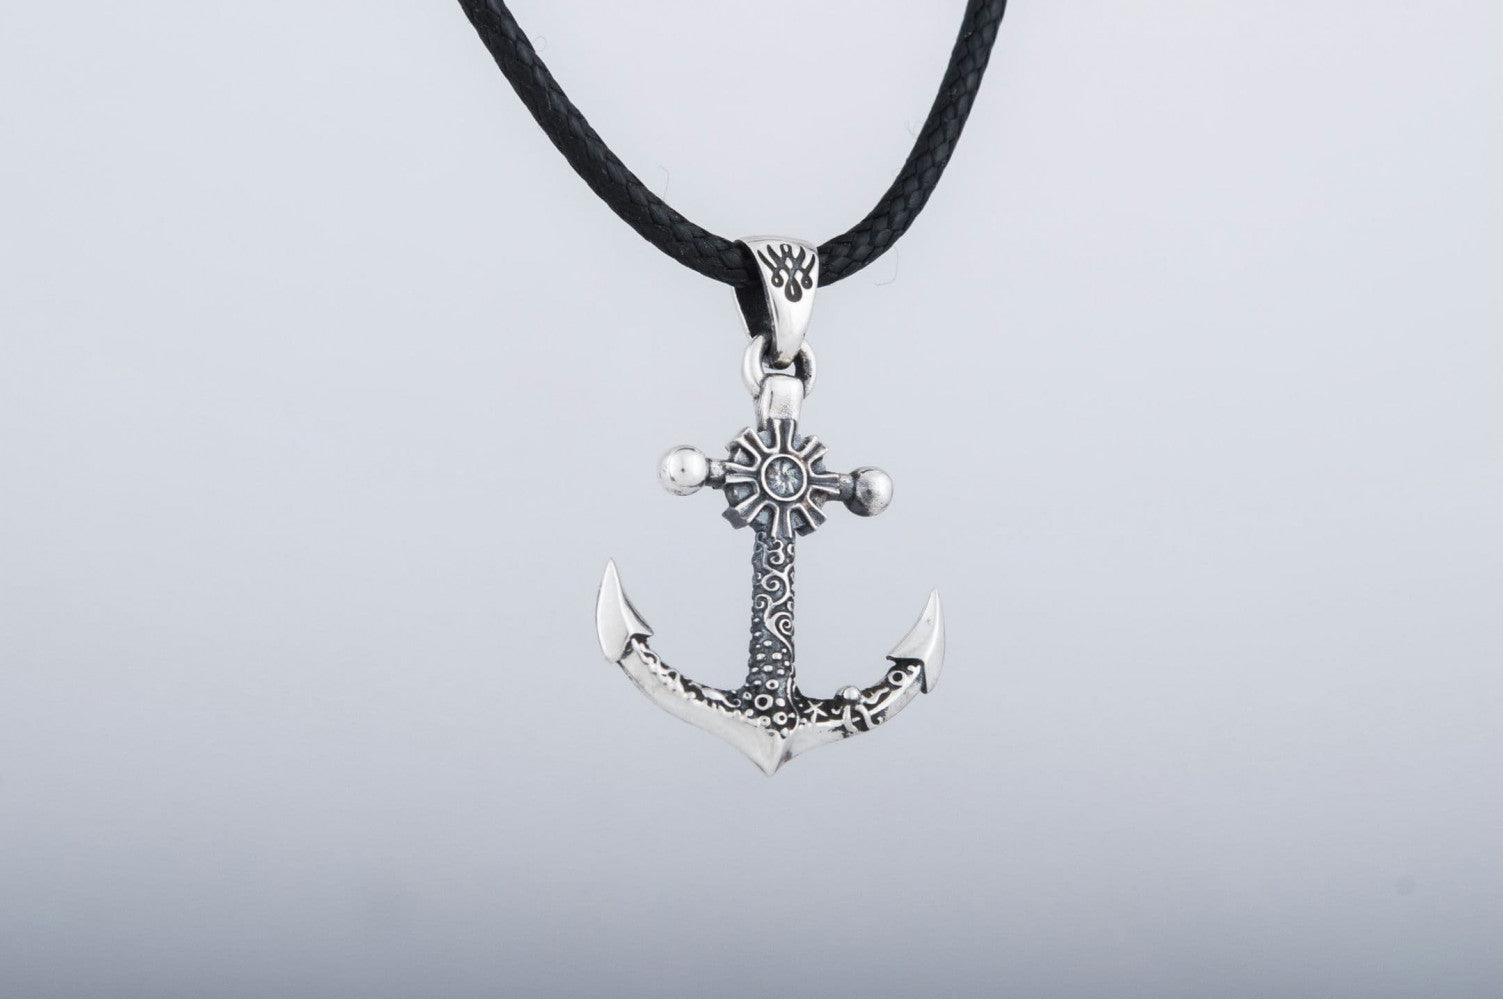 Small Anchor Symbol with Ship Steering Wheel Pendant Sterling Silver Norse Jewelry - vikingworkshop